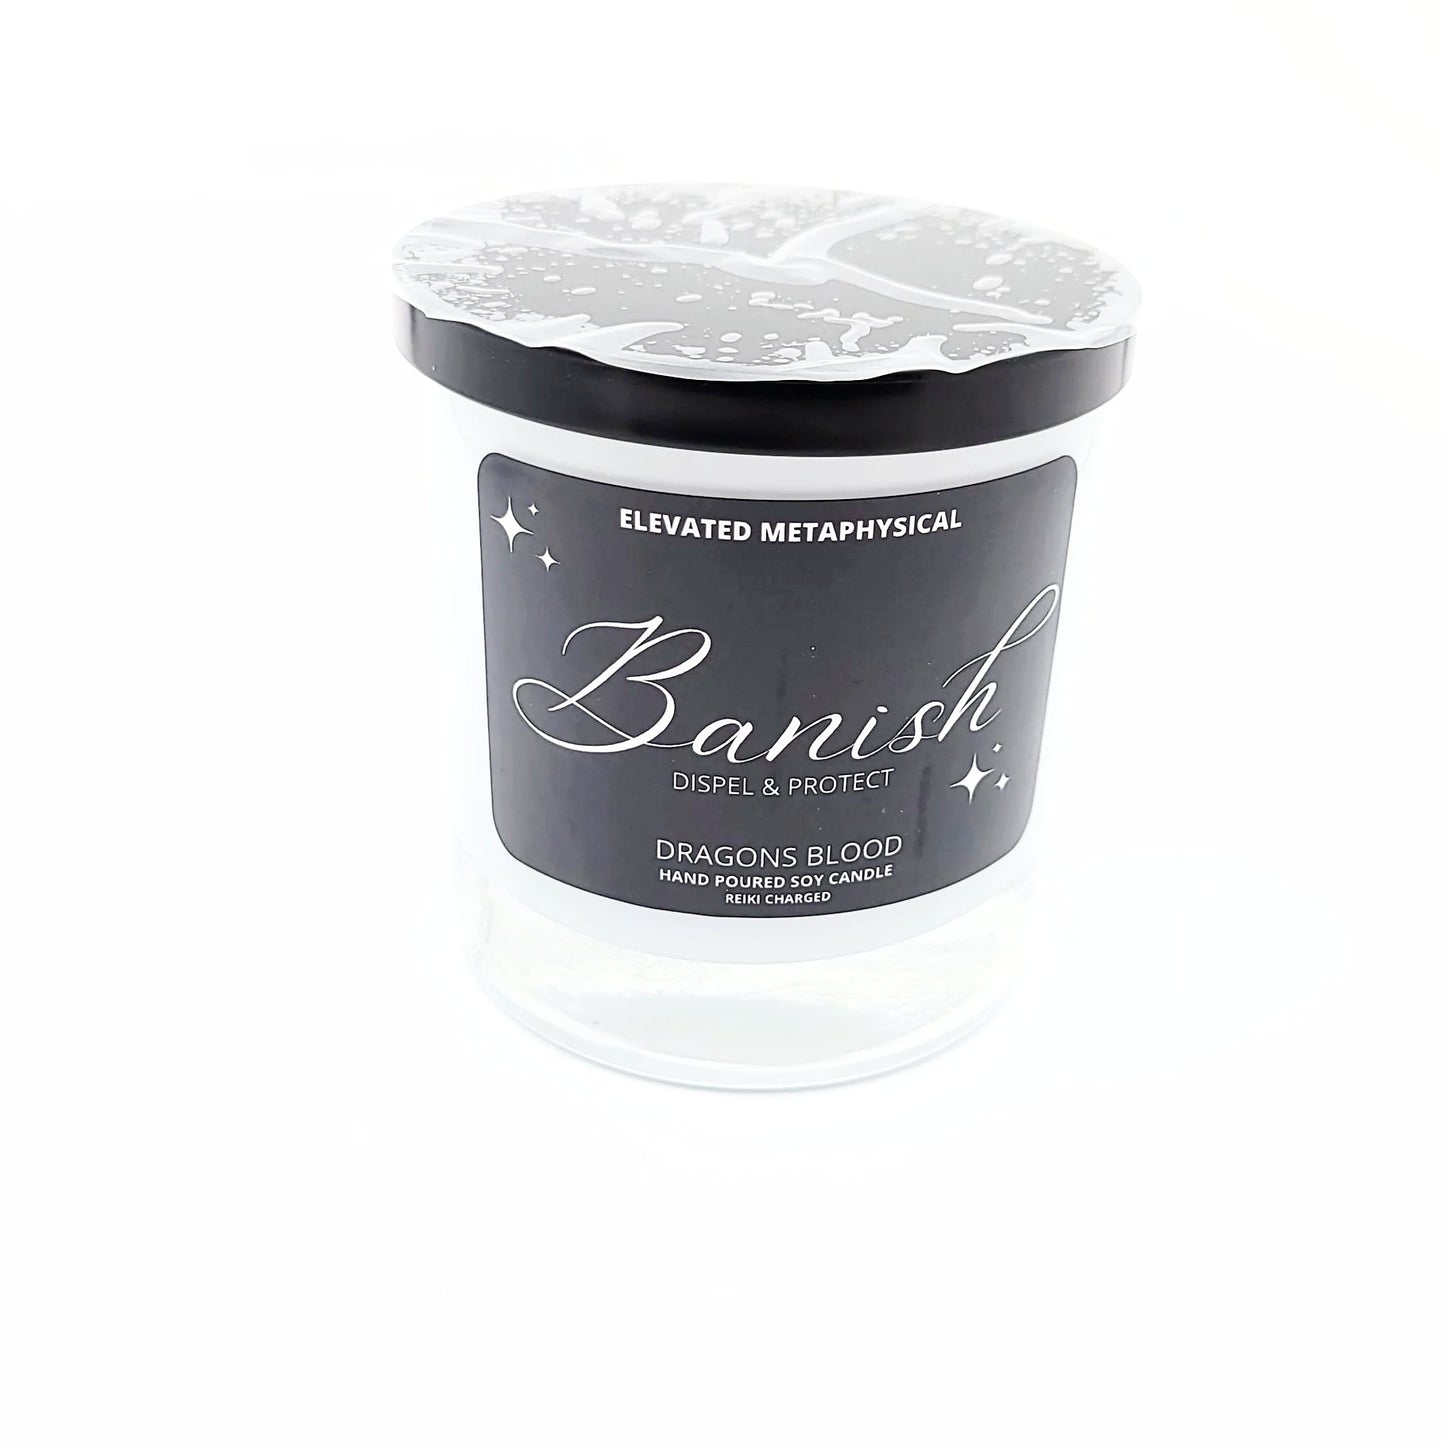 Banish Crystal Candle Dragons Blood Scented 11oz 310g - Elevated Metaphysical